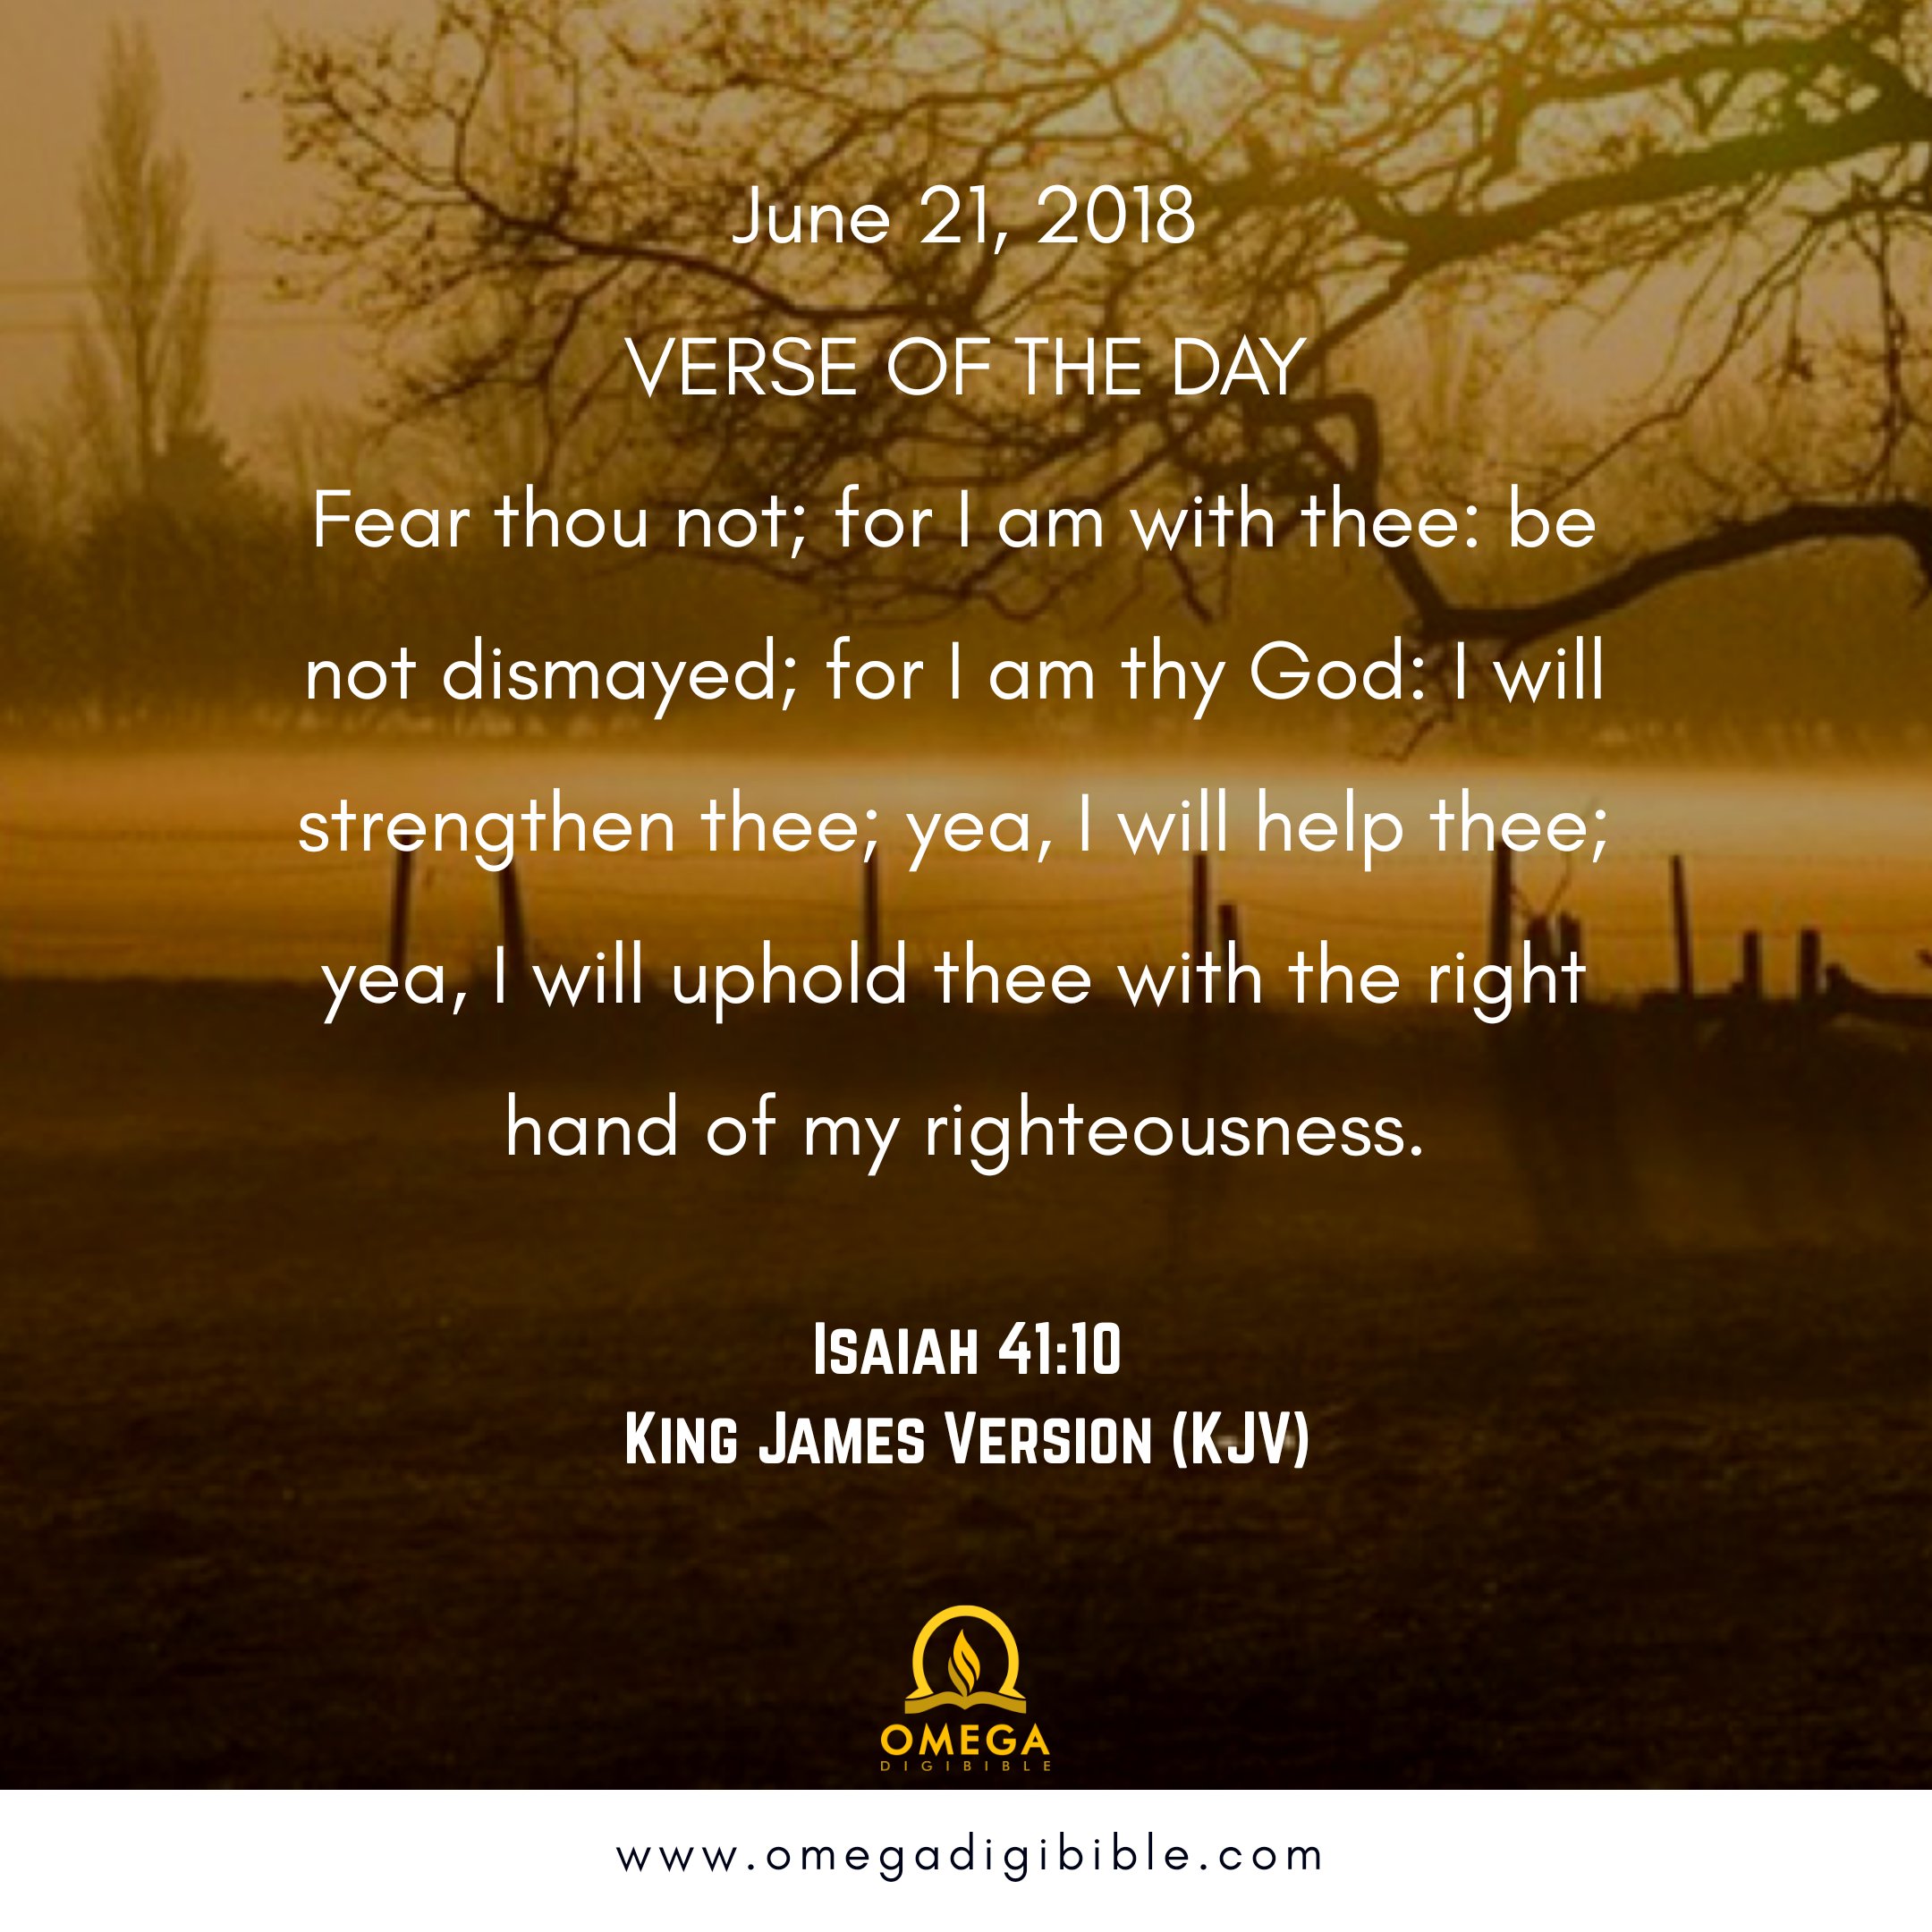 Omega DigiBible on X: June 21, 2018 VERSE OF THE DAY Fear thou